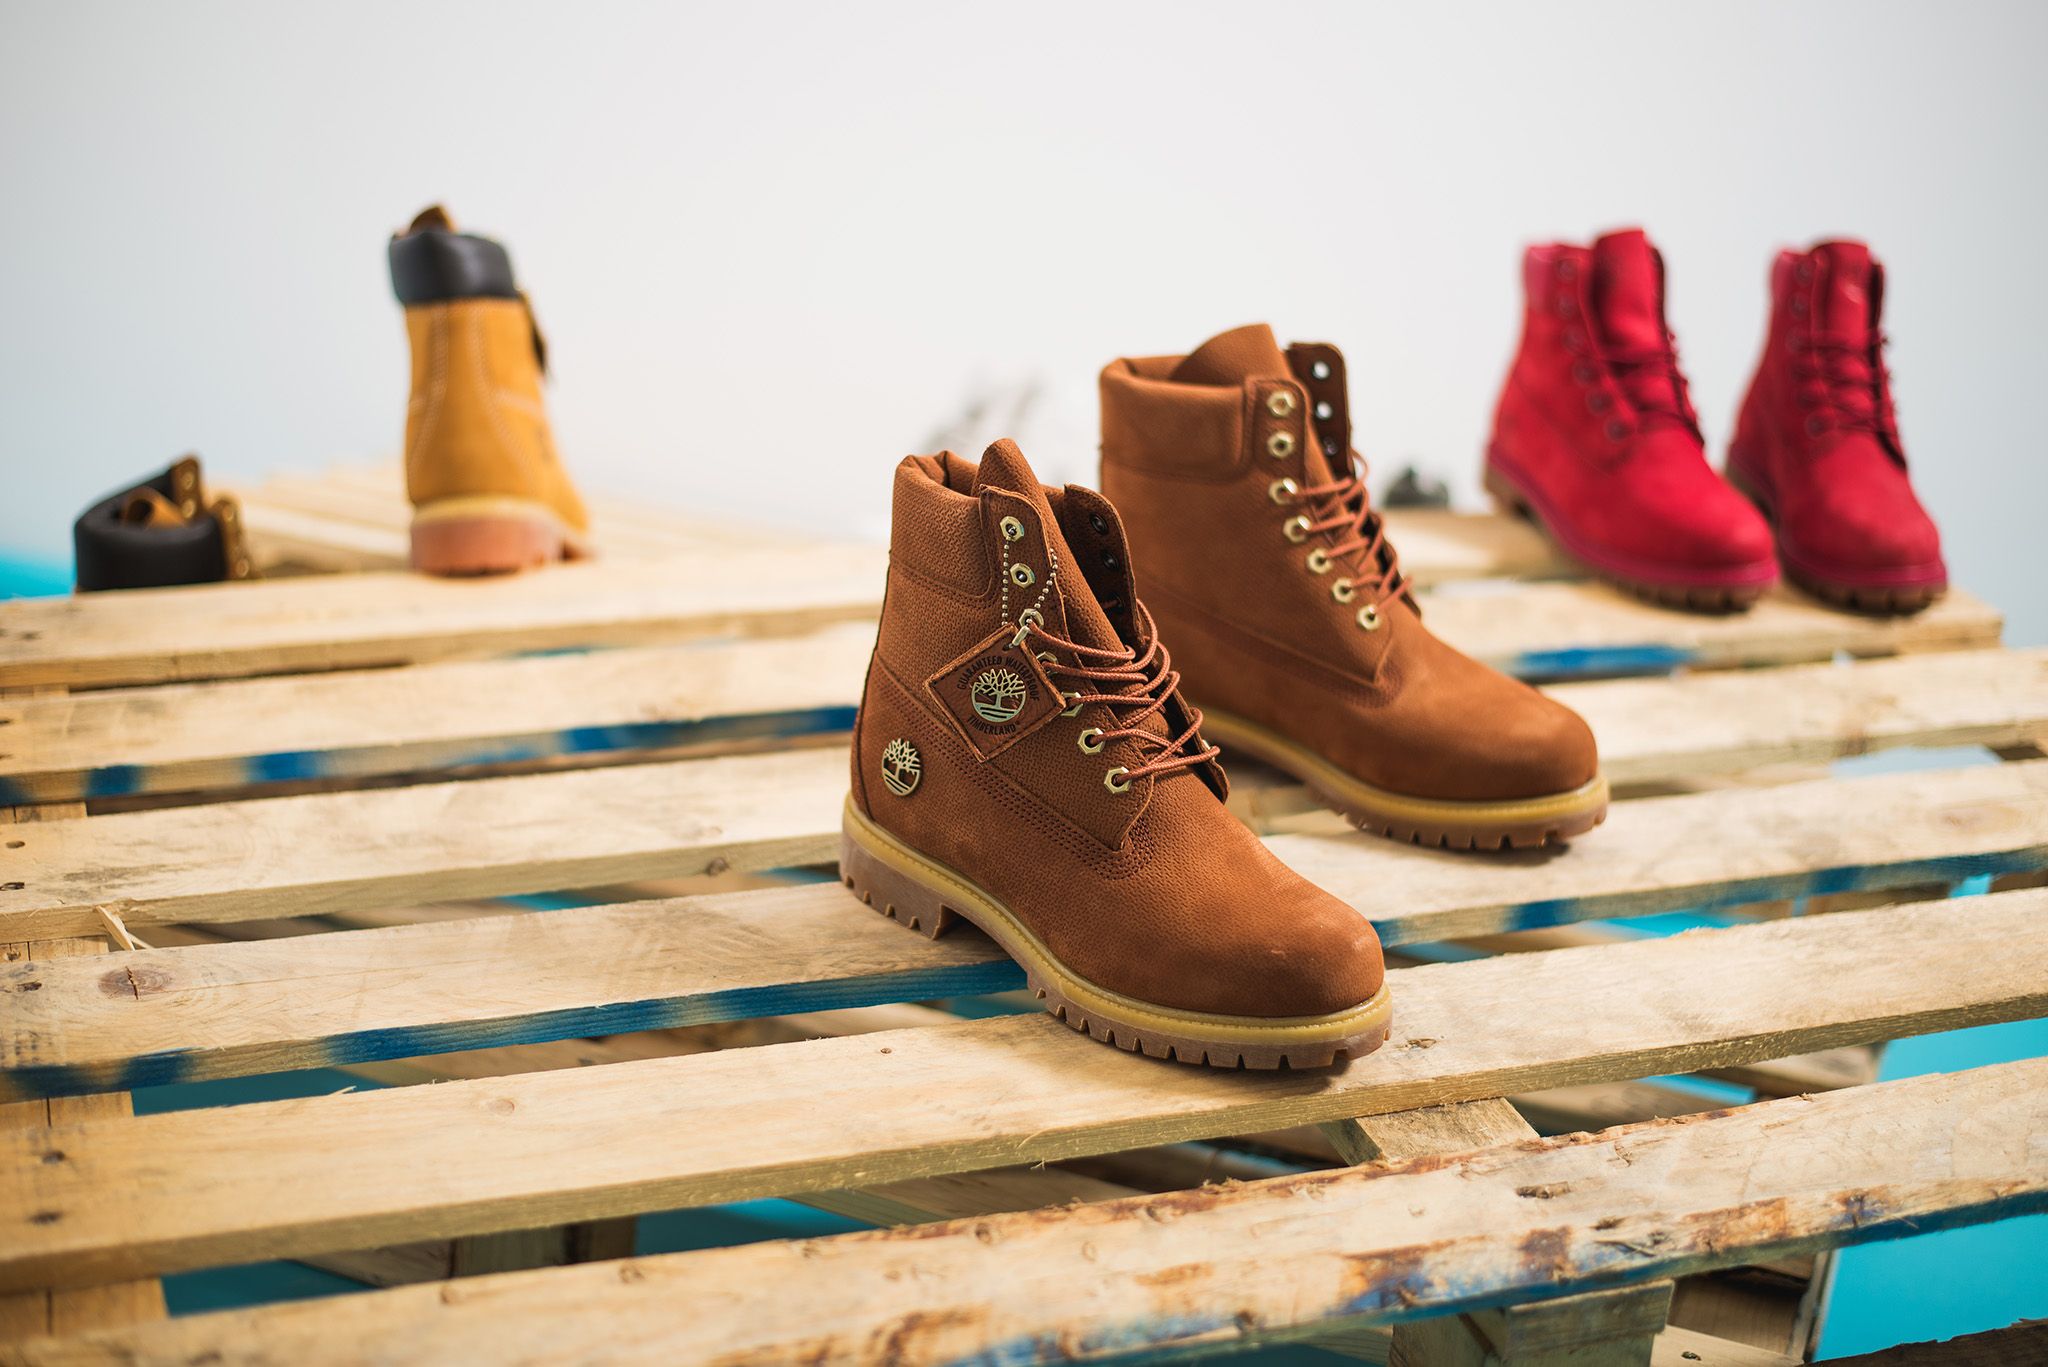 45 years of Timberland fame and fashion